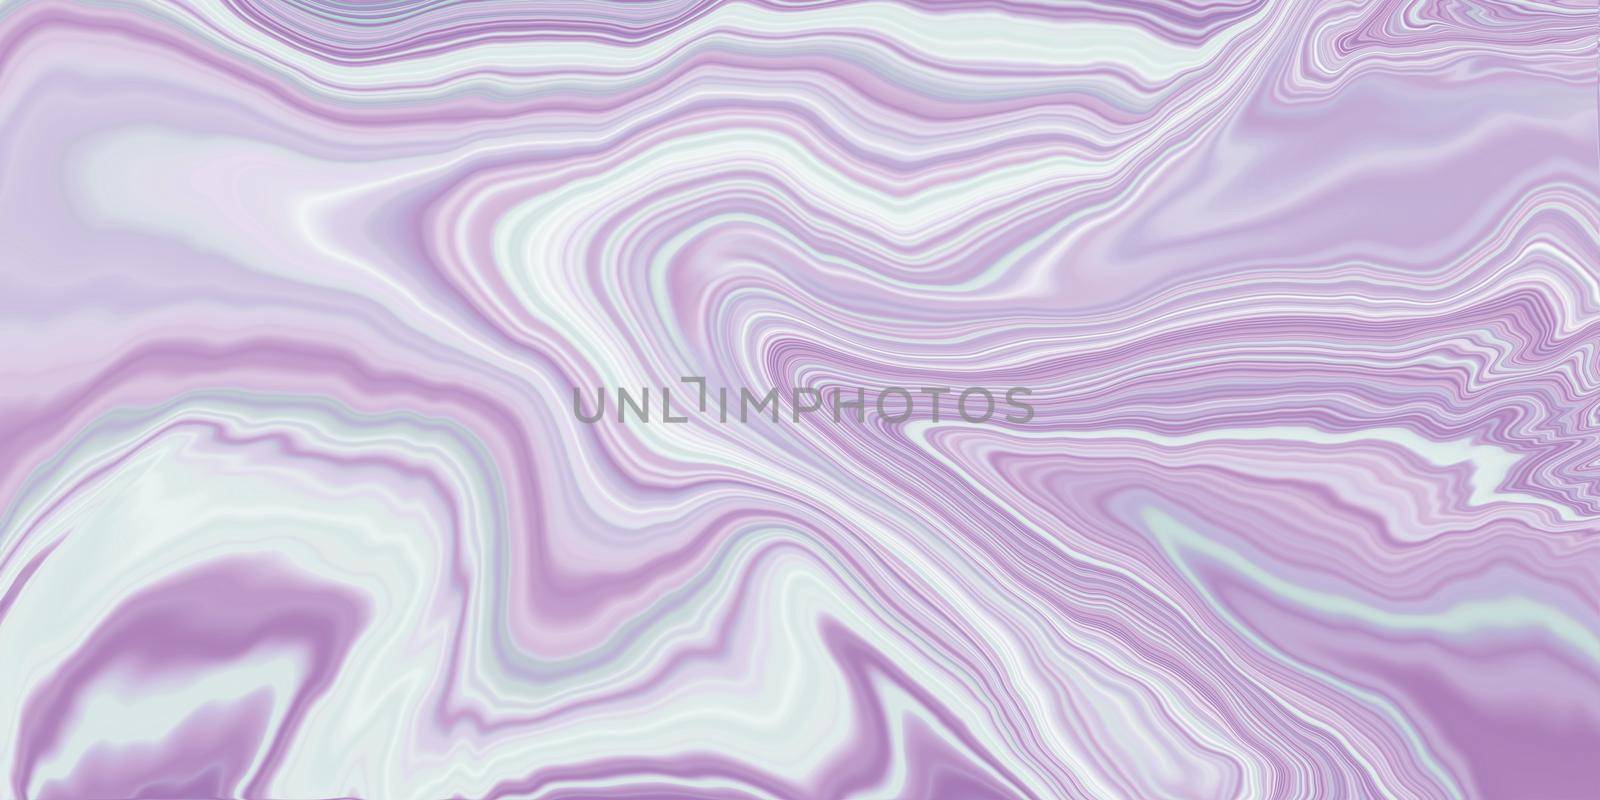 Abstract violet fluid on white background marble texture illustration by Myimagine